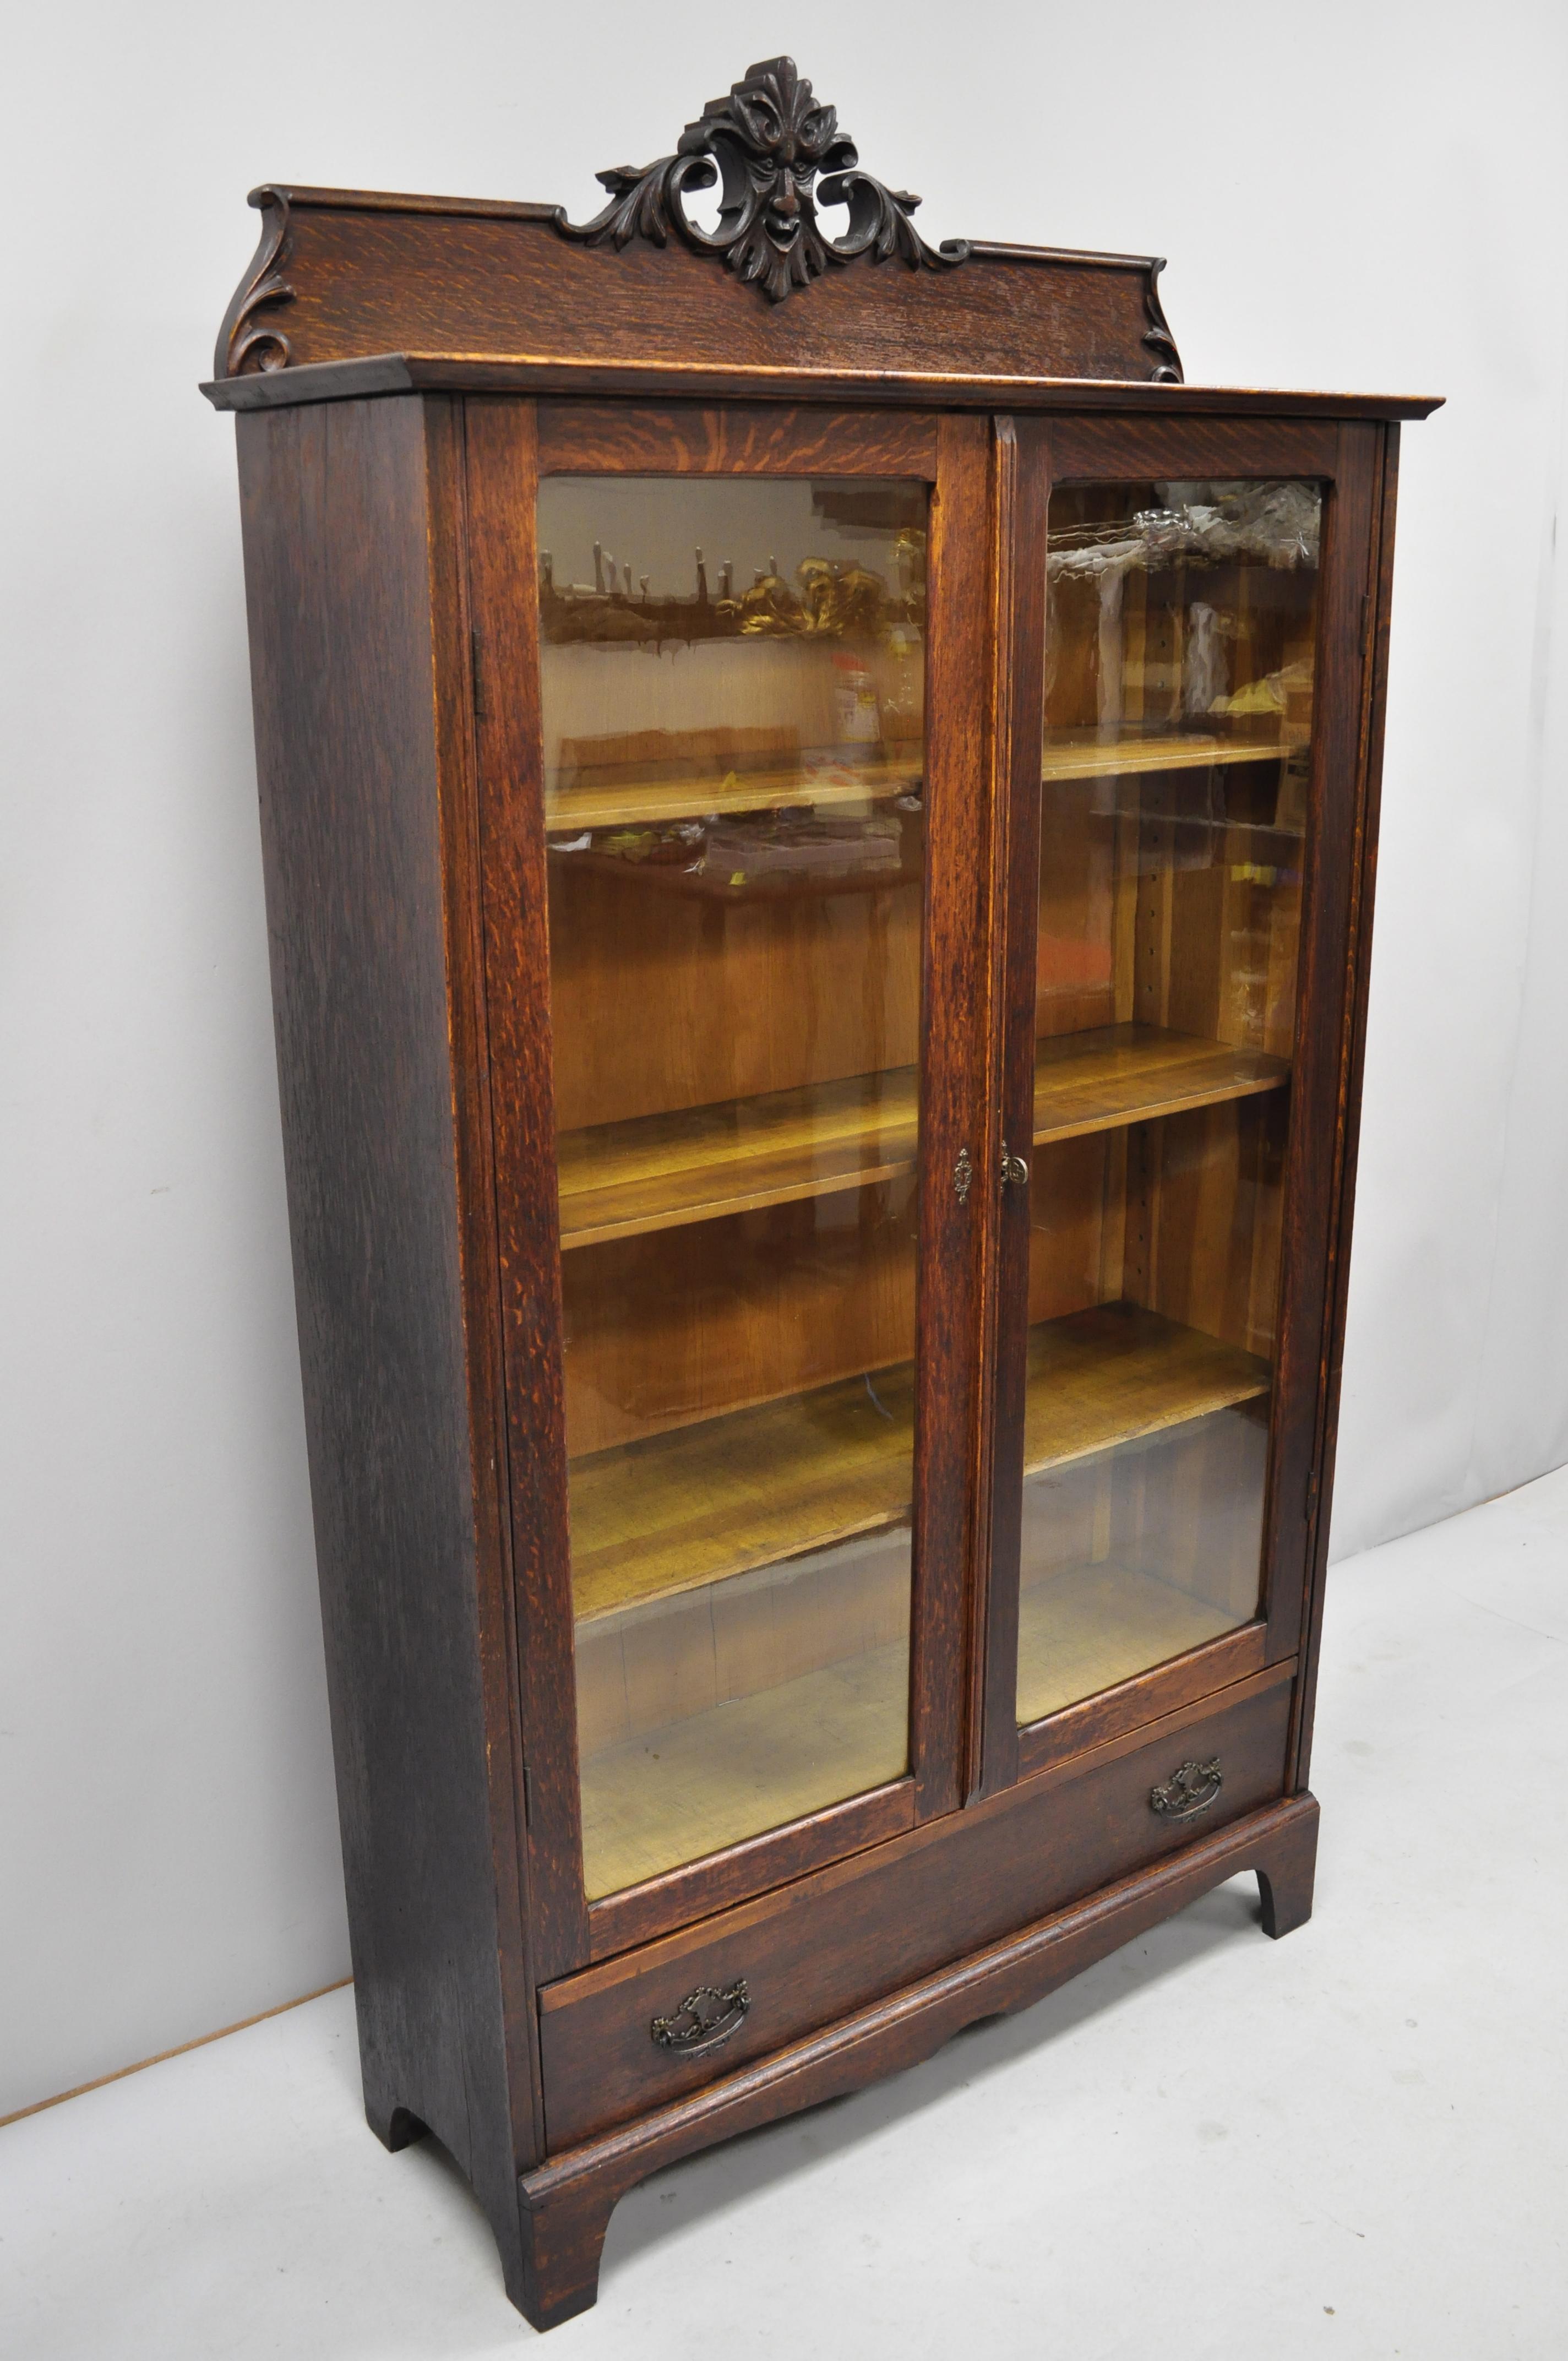 Antique Victorian oak and glass northwind face 2 door bookcase china cabinet.
Item includes carved northwind face, beautiful wood grain, 2 glass swing doors, 1 dovetailed drawer, adjustable shelves, very nice antique item, quality American